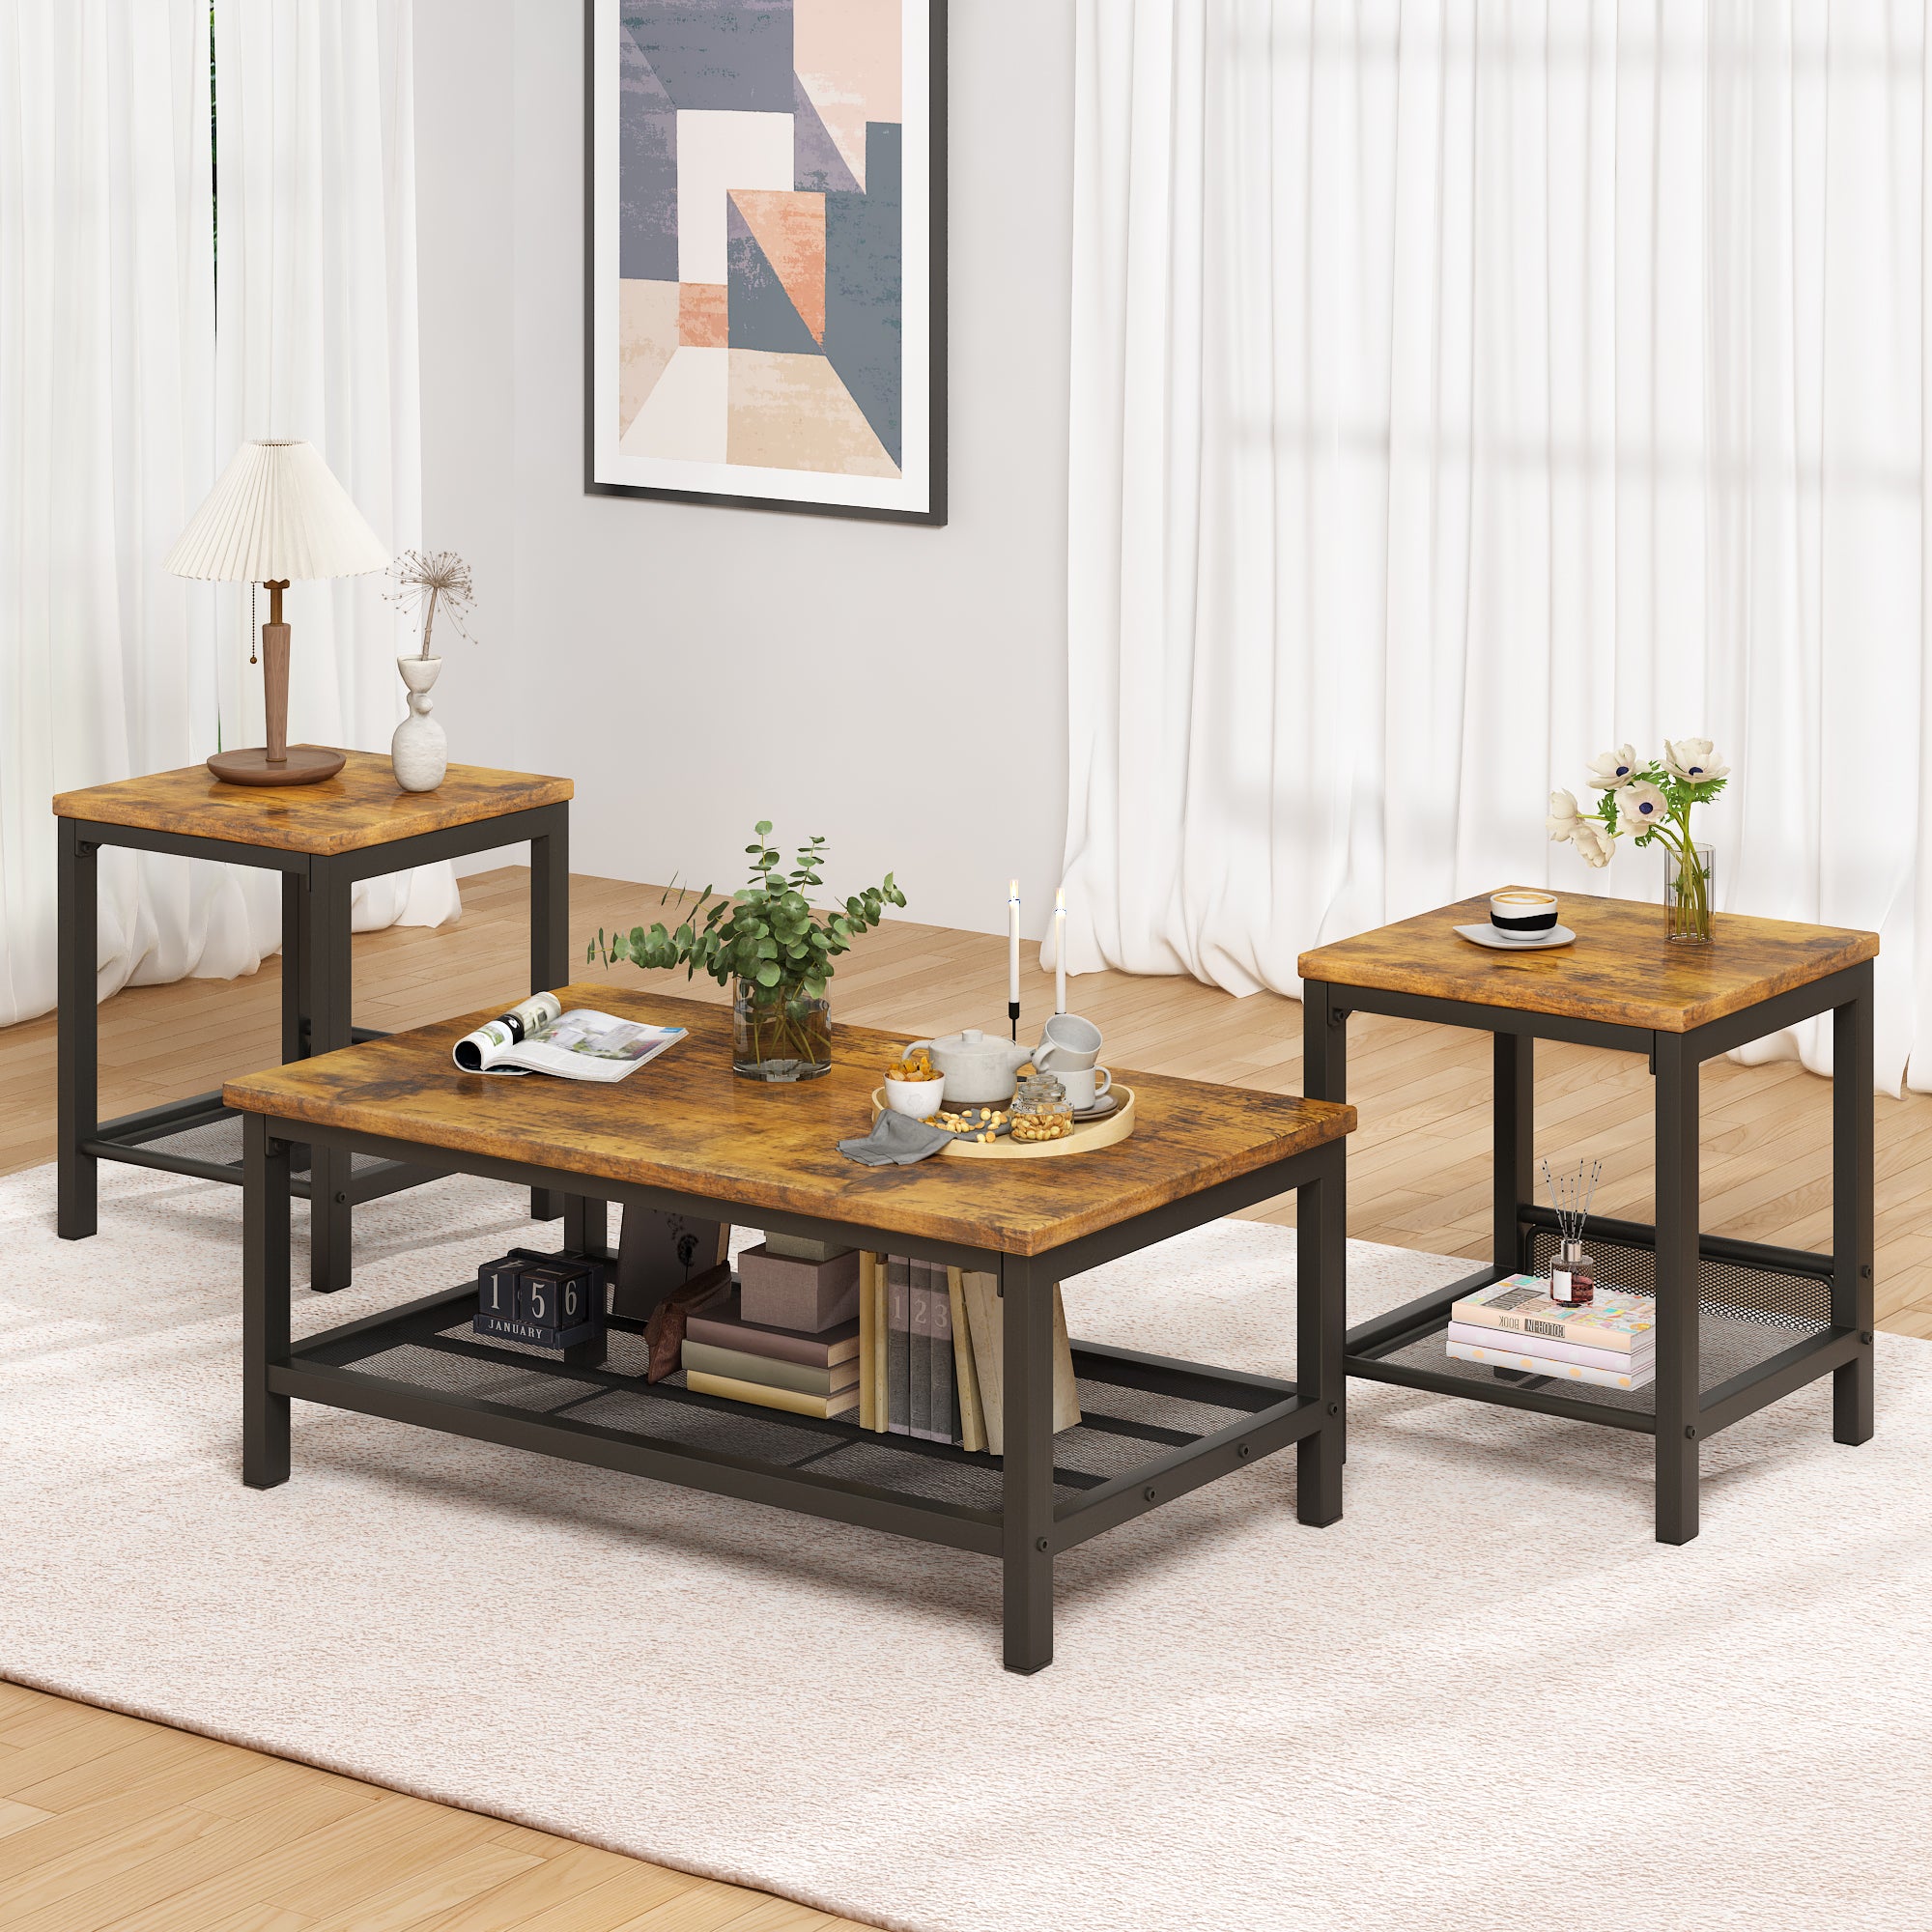 AWQM Coffee Table Set of 3, Industrial Coffee Table with 2 Square End Side Tables, Modern Living Room Table Set with Metal Frame for Apartment Home Office, Rustic Brown